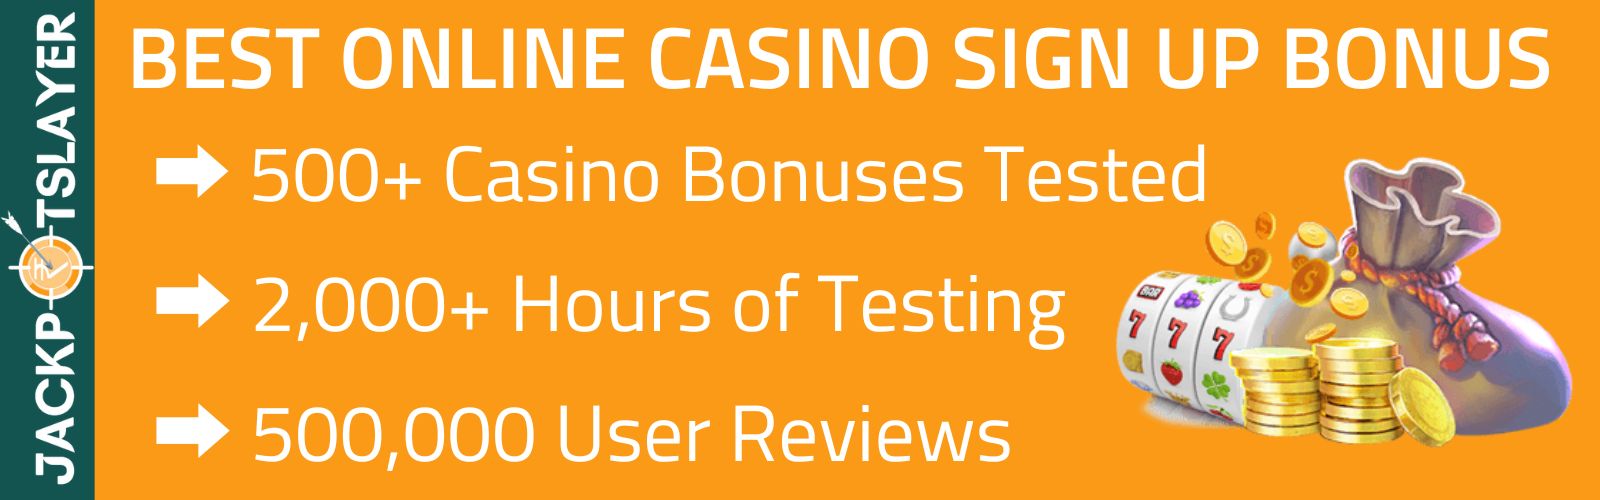 Where Will online casino Be 6 Months From Now?